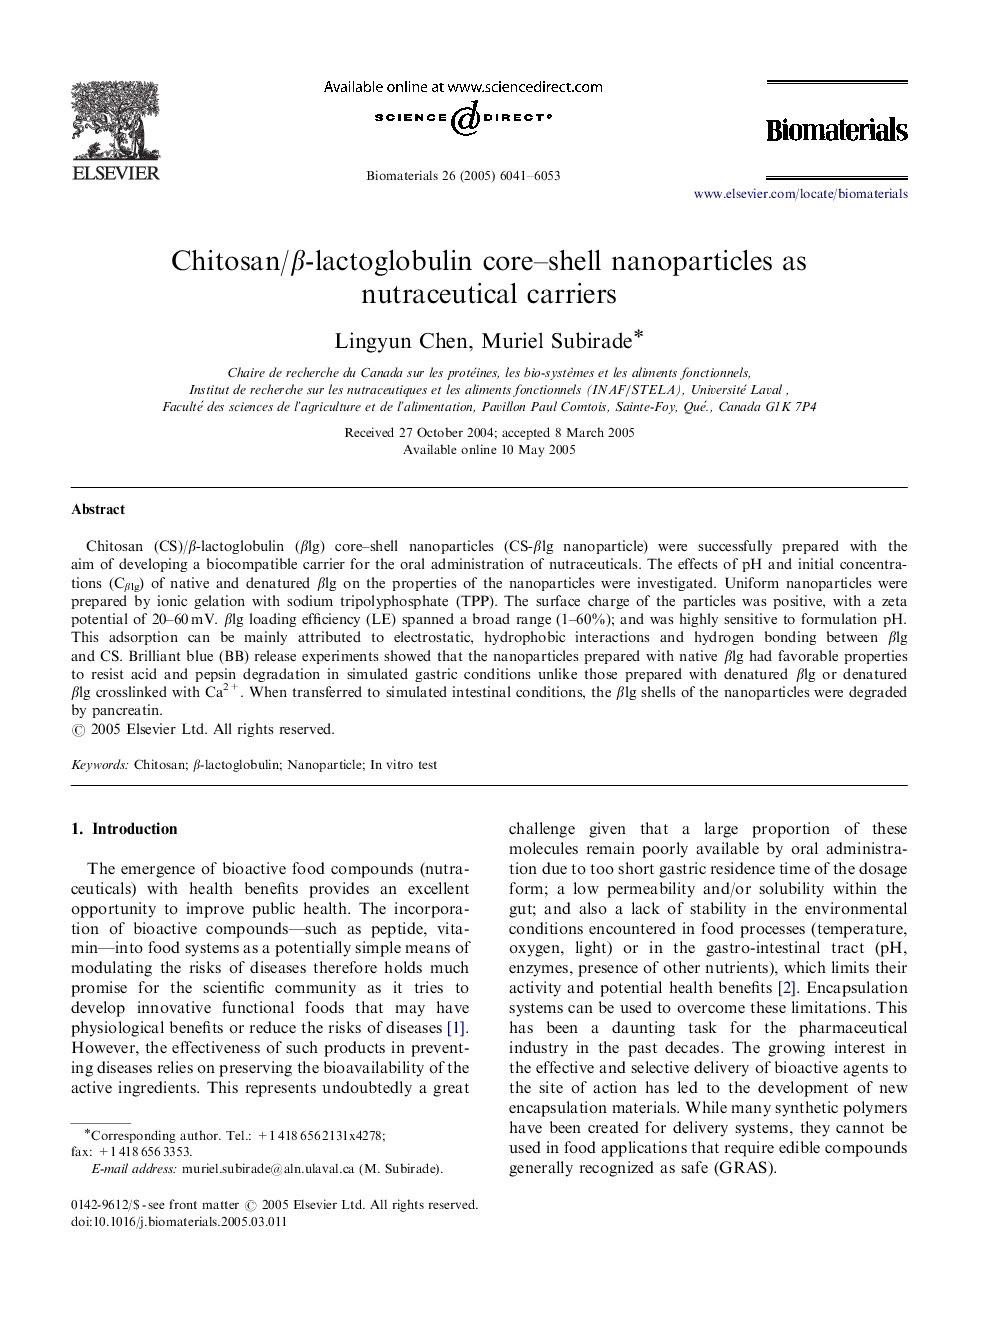 Chitosan/β-lactoglobulin core–shell nanoparticles as nutraceutical carriers